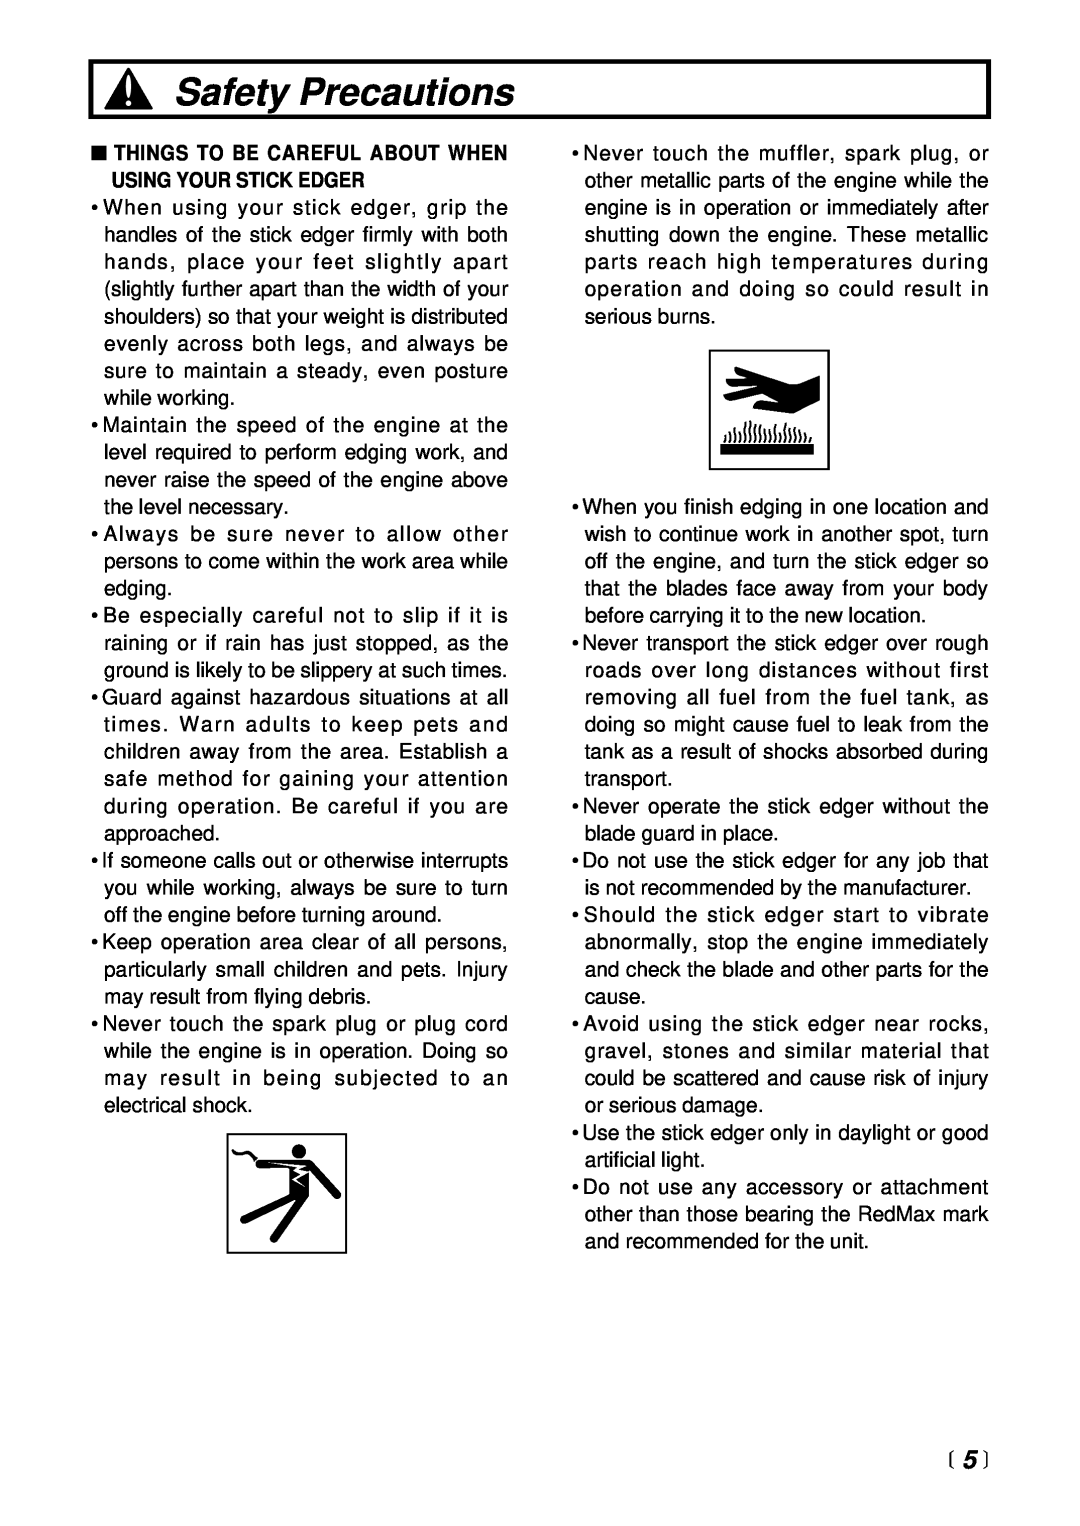 RedMax HE2601 manual 5 , Safety Precautions 